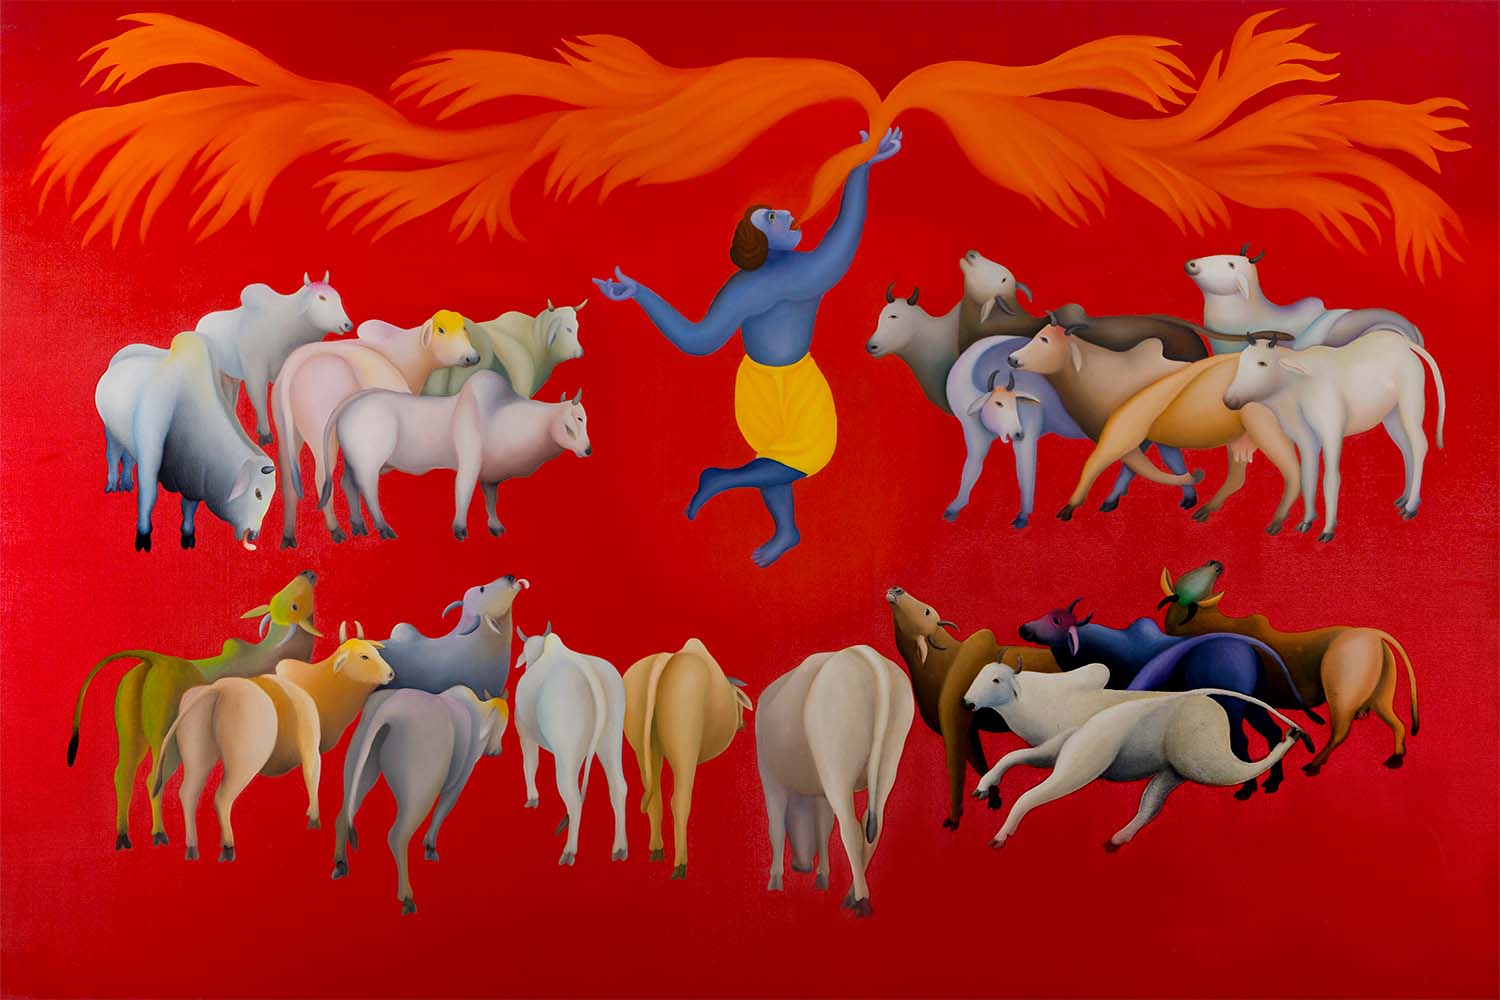 An oil painting depicting the deity Krishna eating fire, surrounded by groups of cows, with a bright red background.